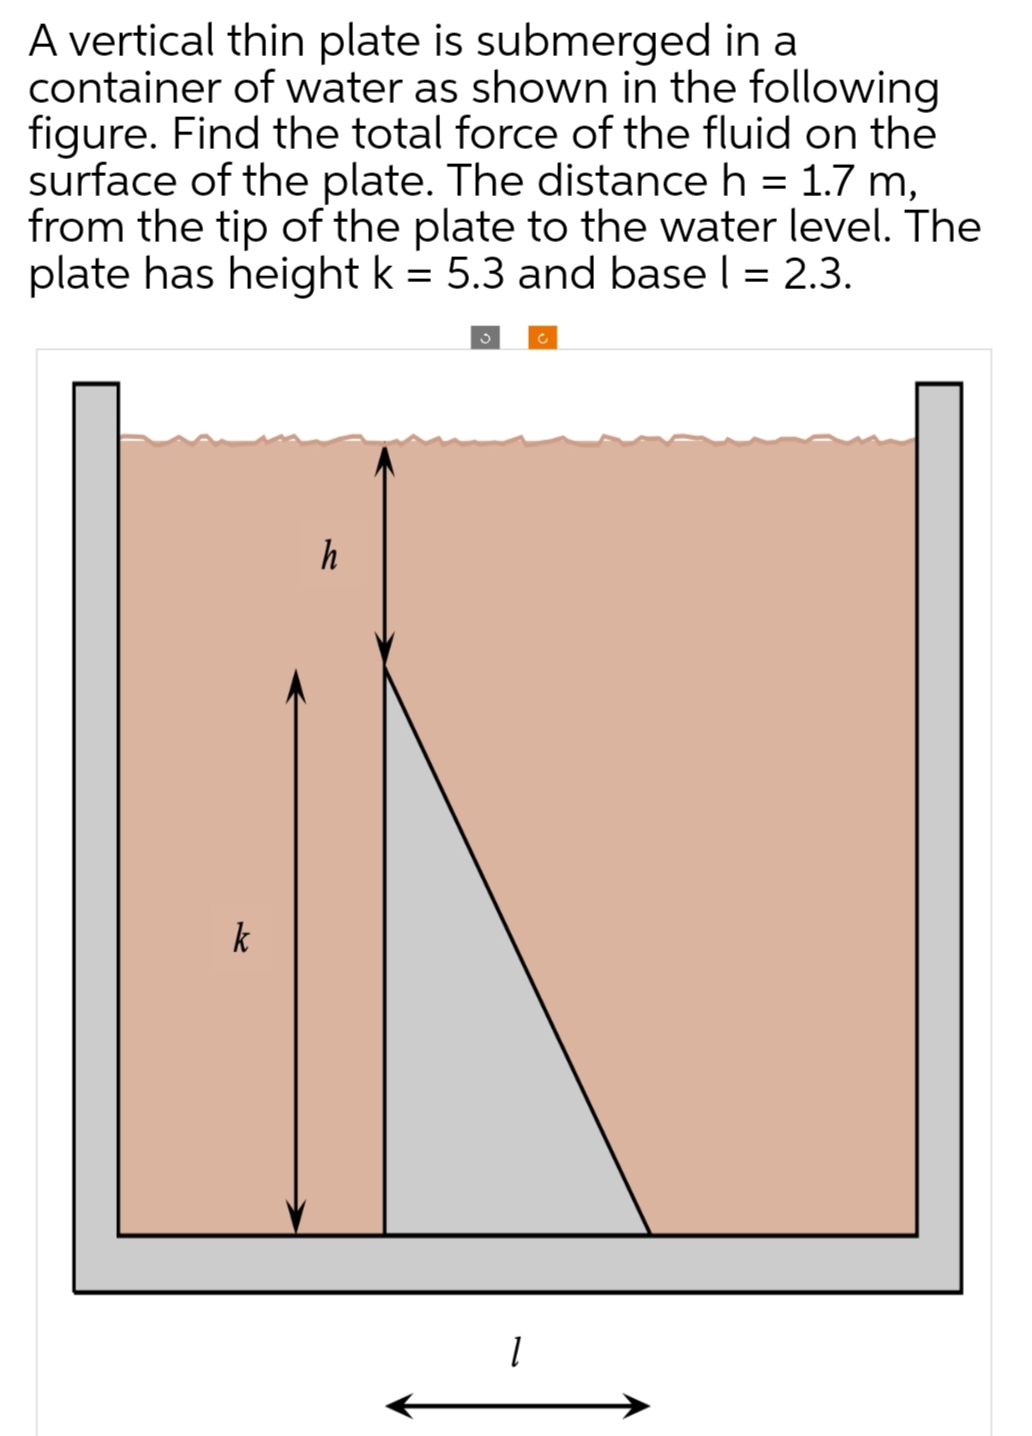 A vertical thin plate is submerged in a
container of water as shown in the following
figure. Find the total force of the fluid on the
surface of the plate. The distance h = 1.7 m,
from the tip of the plate to the water level. The
plate has height k = 5.3 and base l = 2.3.
h
1